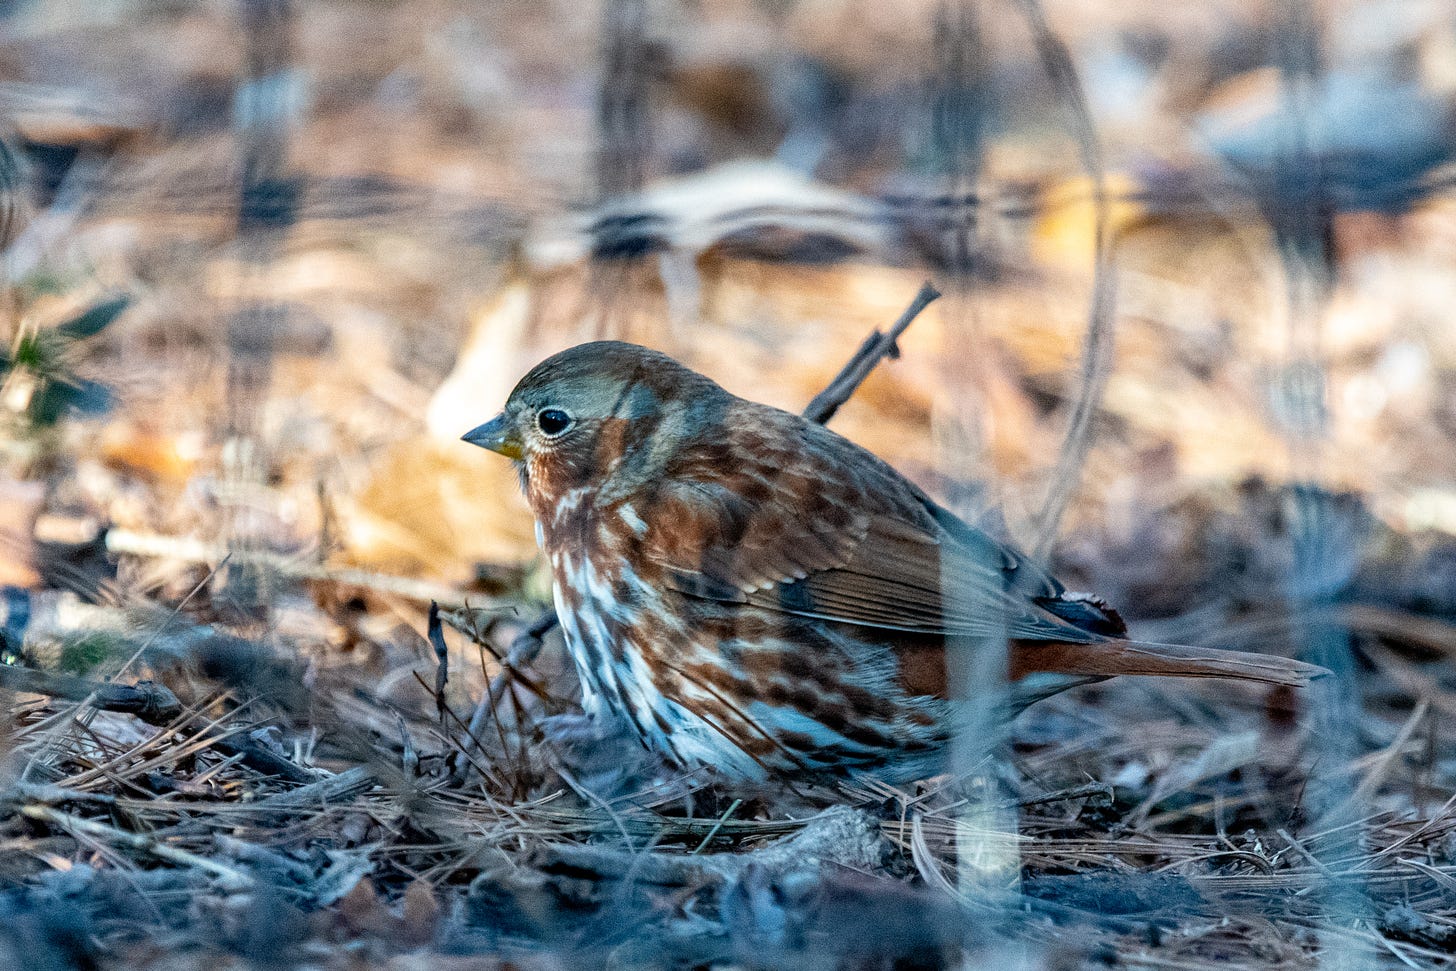 Fox sparrow on the ground in shadow, behind the out-of-focus mesh of a fence